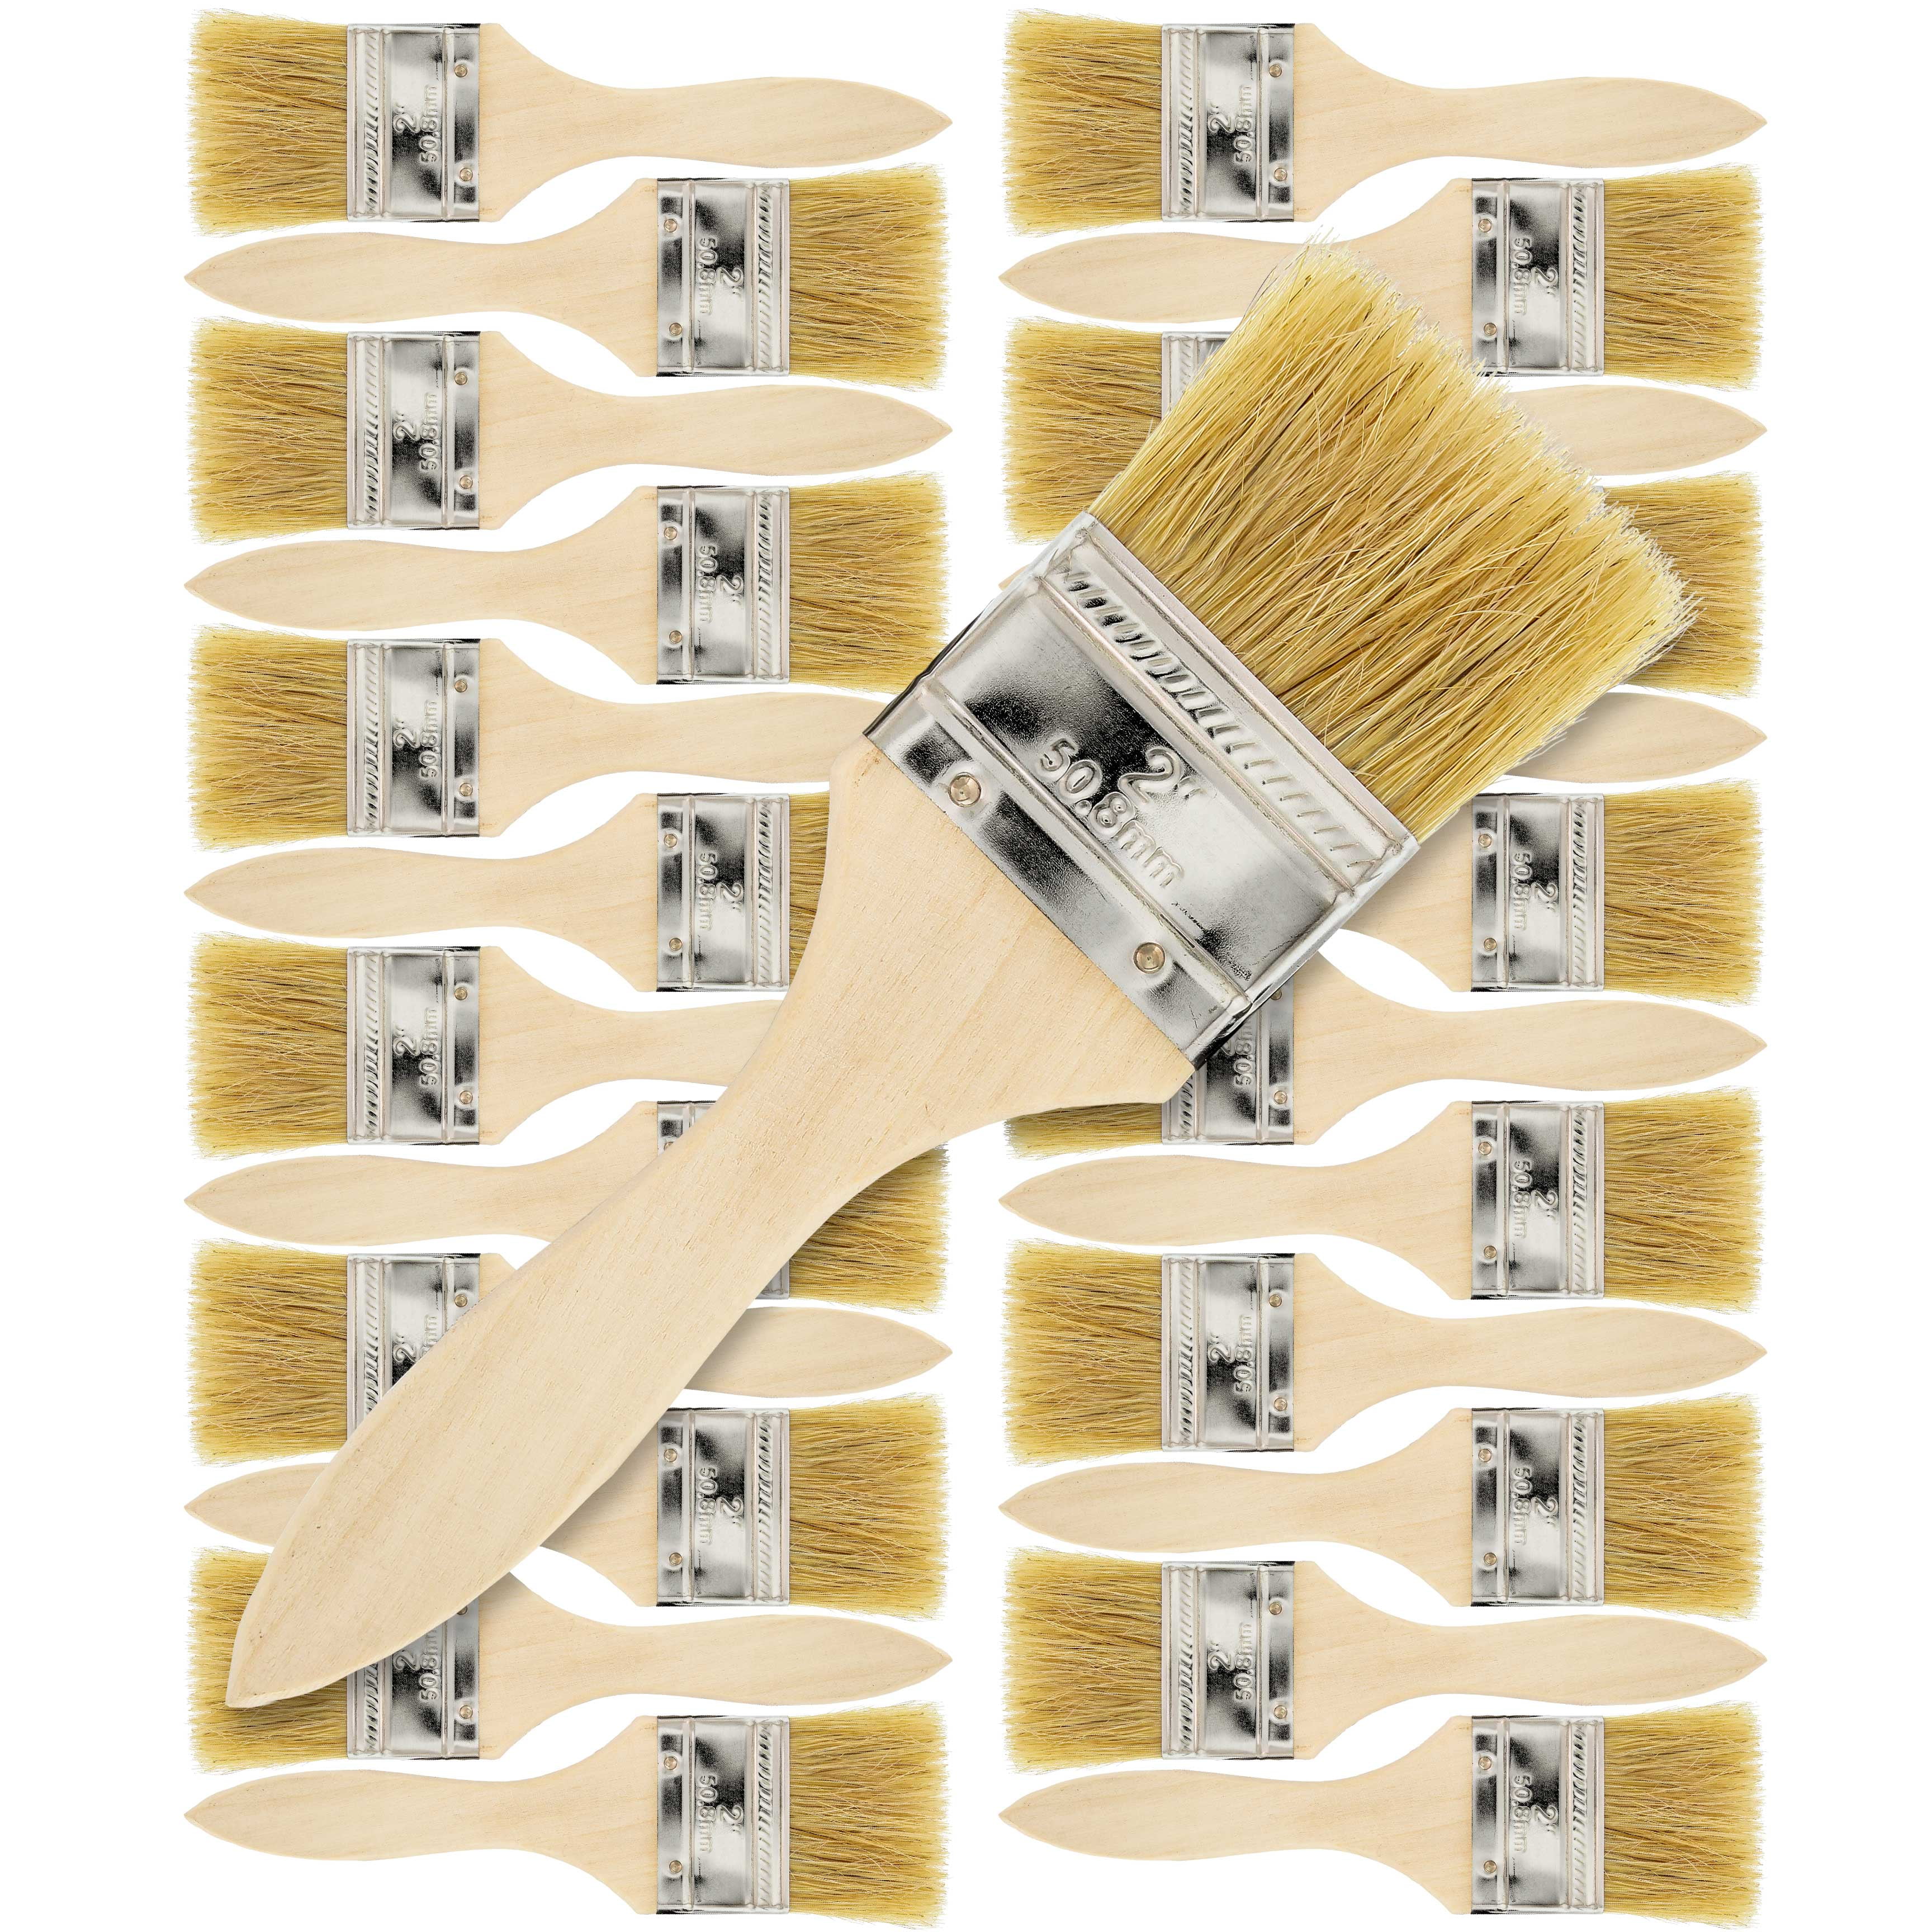 US Art Supply 24 Pack of 2 inch Paint and Chip Paint Brushes for Paint,  Stains, Varnishes, Glues, and Gesso